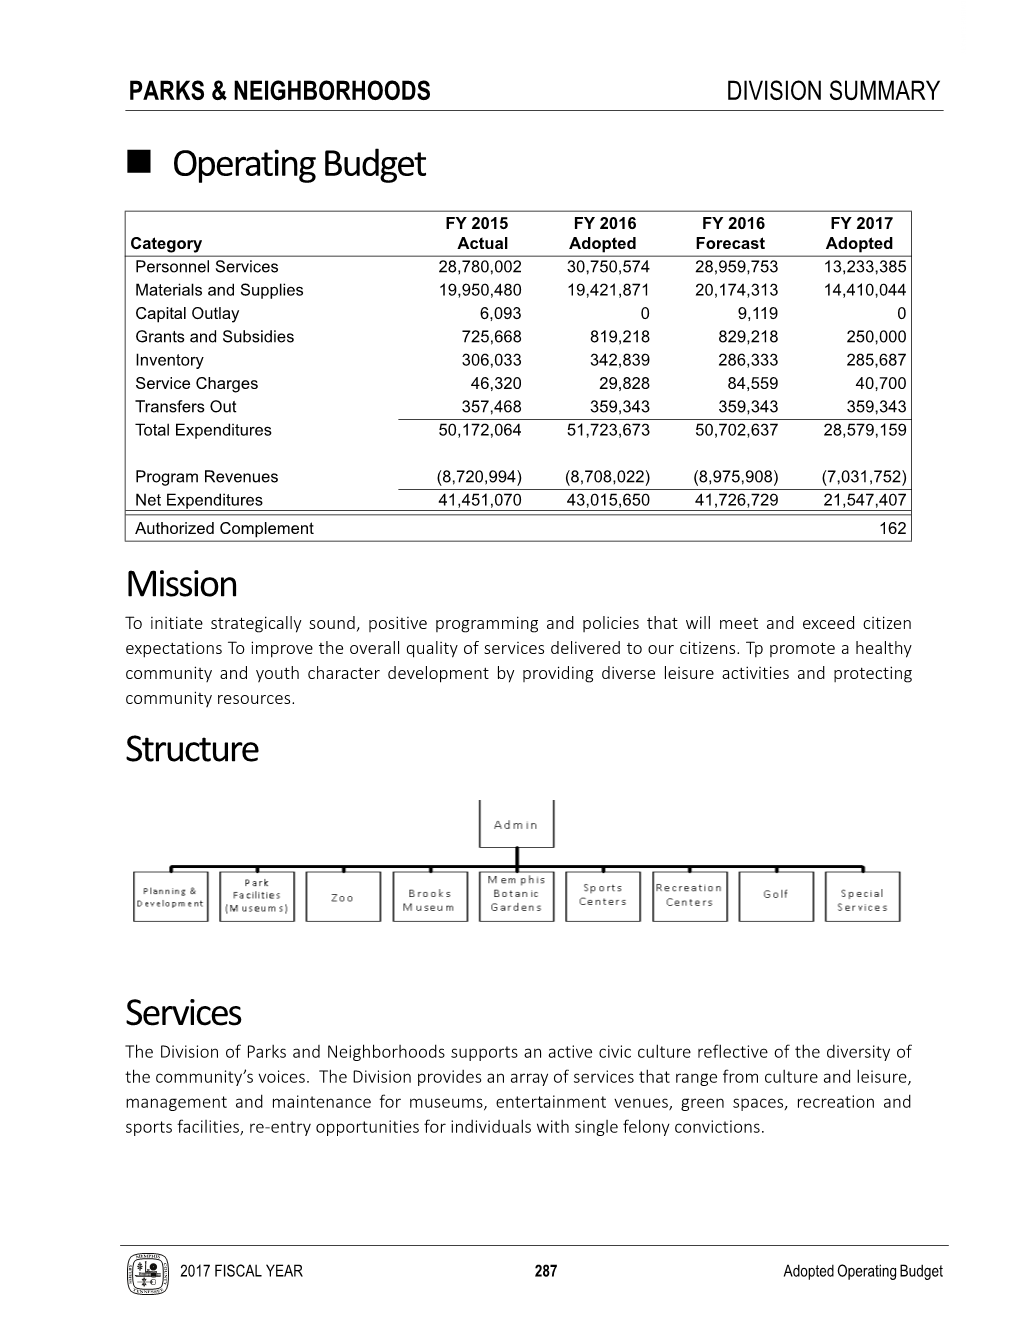 Operating Budget Mission Structure Services